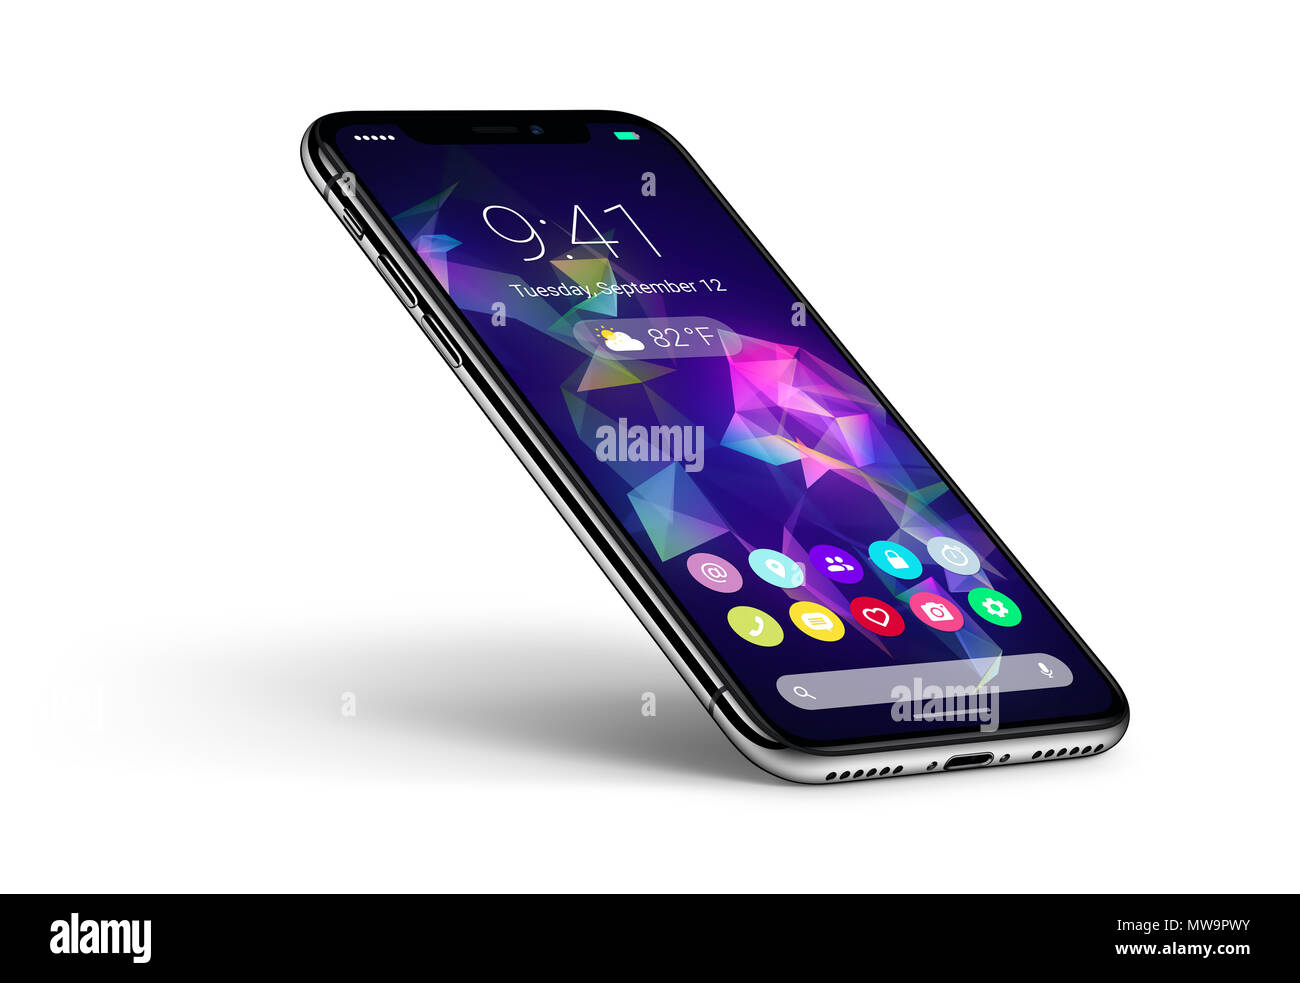 Perspective veiw smartphone concept with material design flat UI interface similar to Android P. Stock Photo